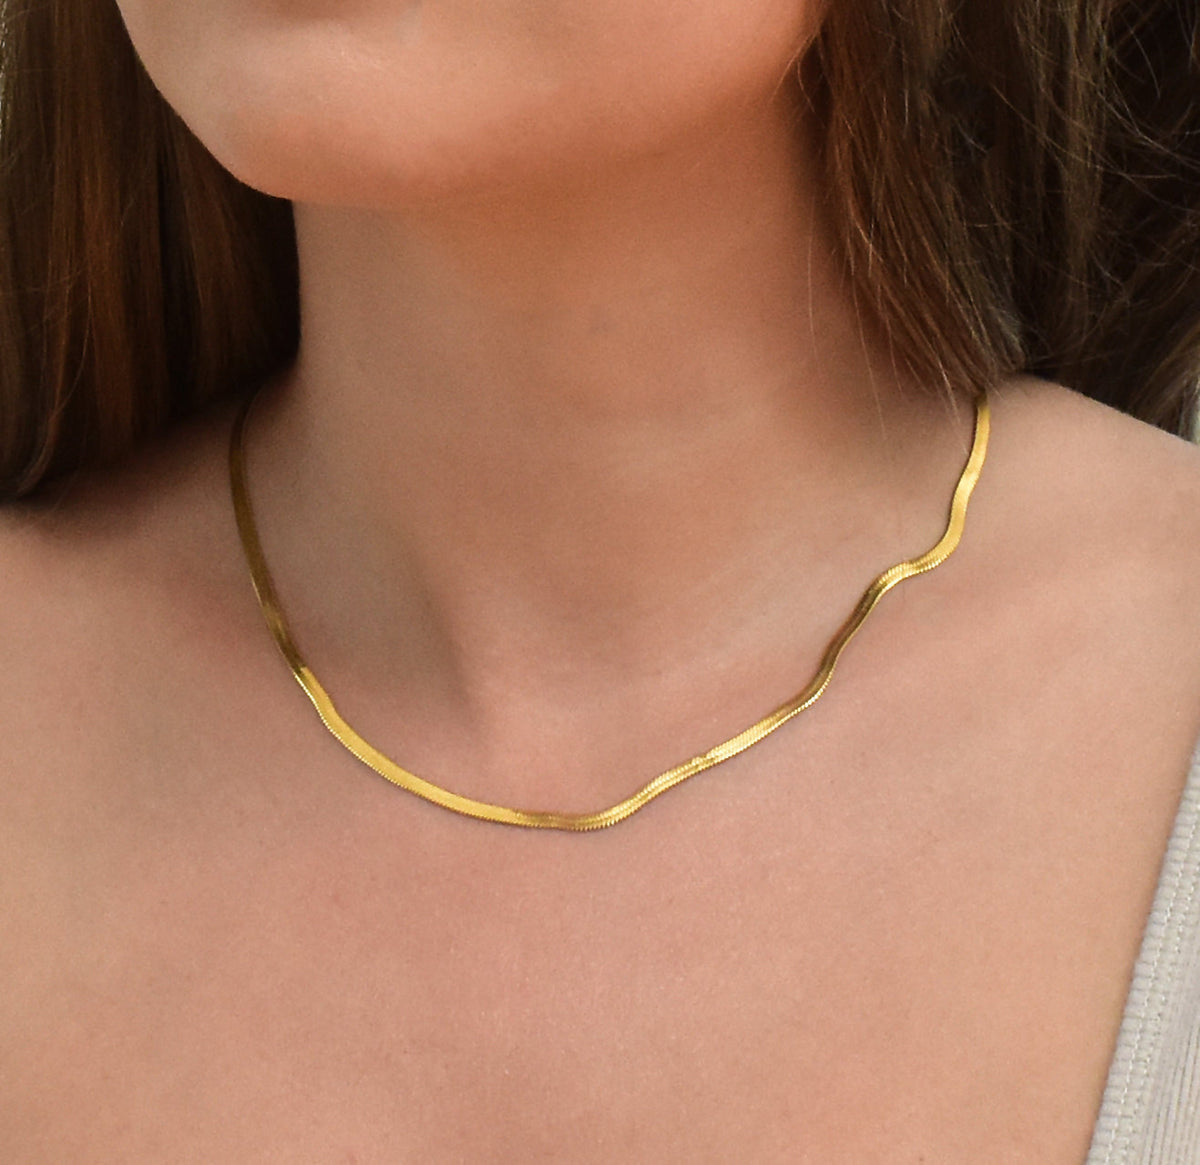 4MM GOLD THIN SNAKE CHAIN NECKLACE -SAMPLE